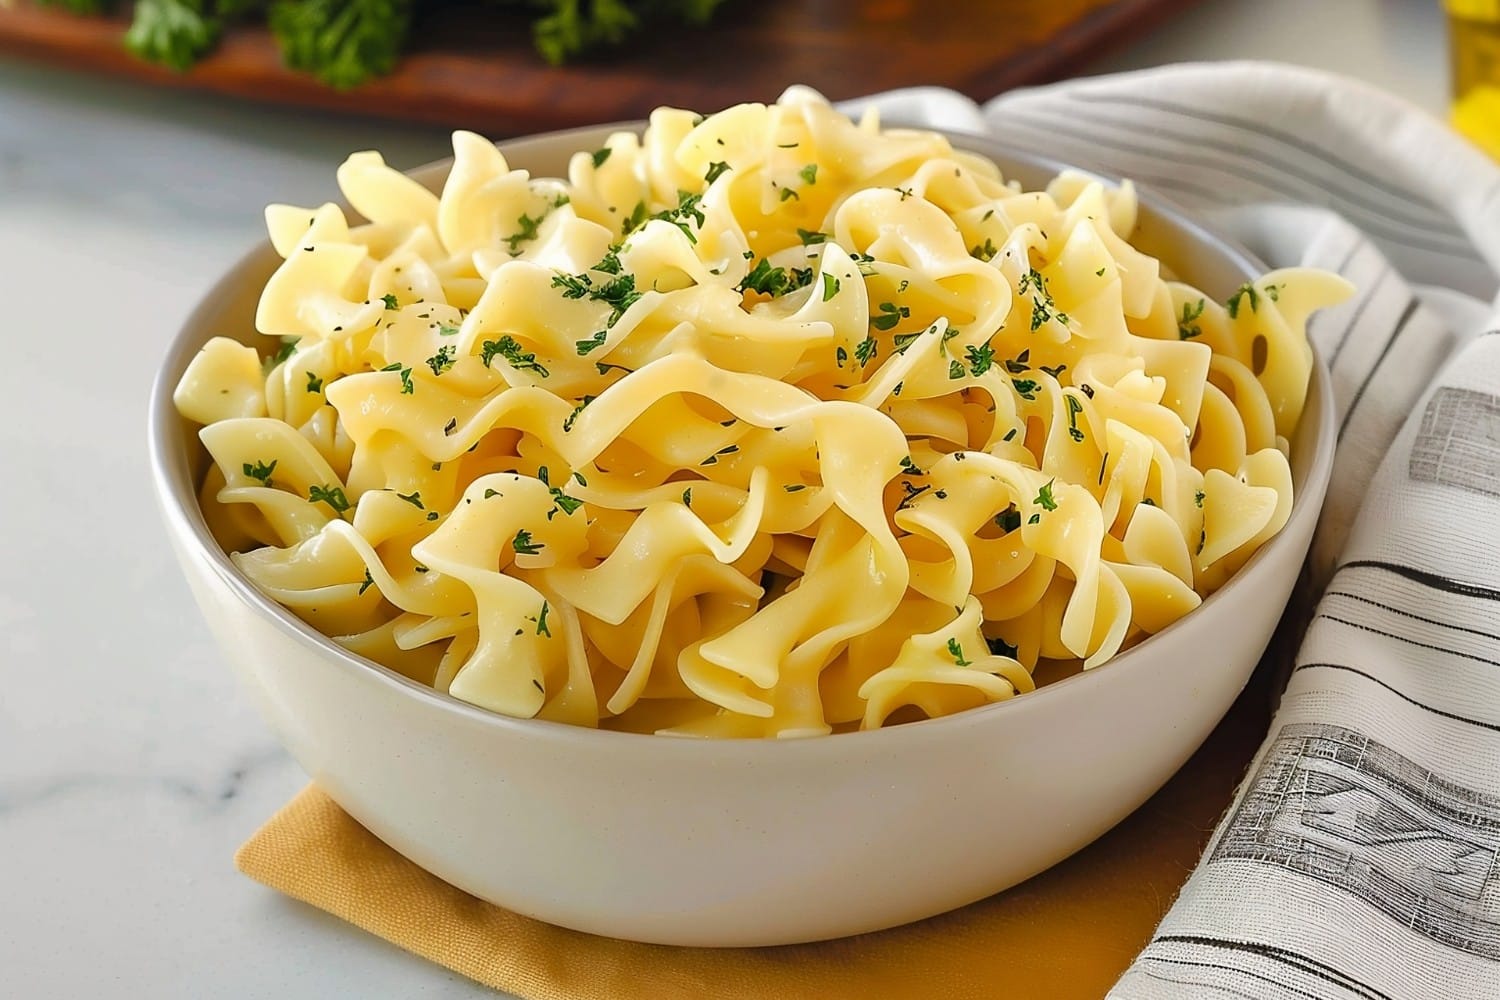 Mouthwatering Amish egg noodles topped with parsley in a white marble countertop